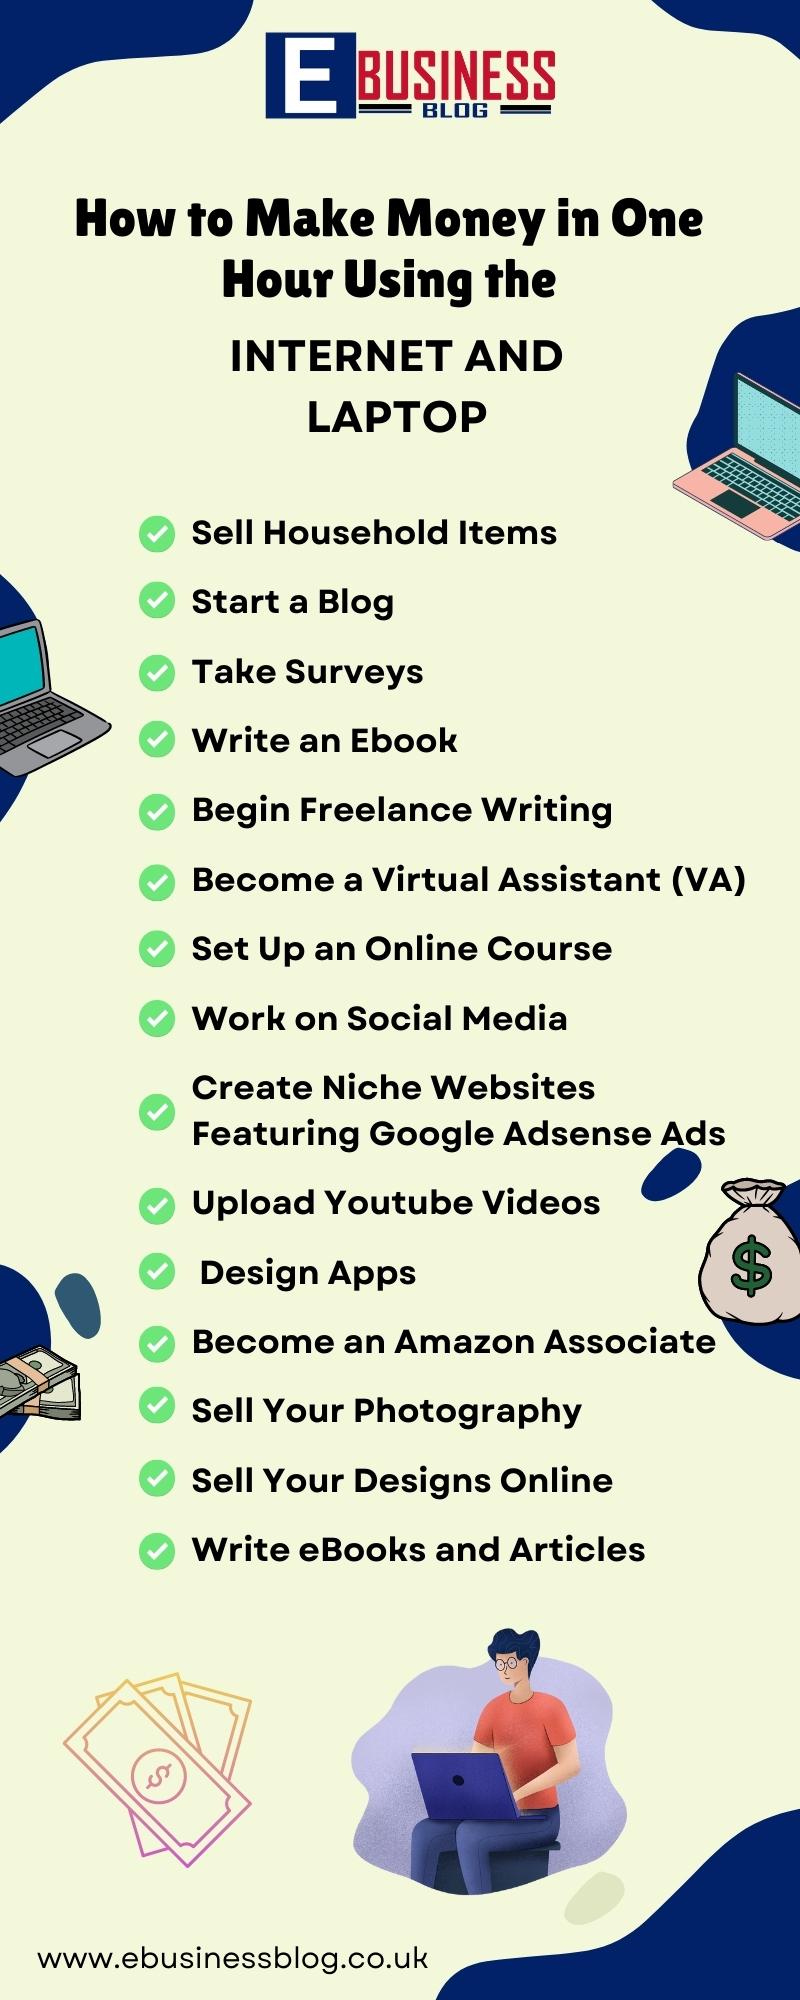 How to Make Money in One Hour Using the Internet and a Laptop